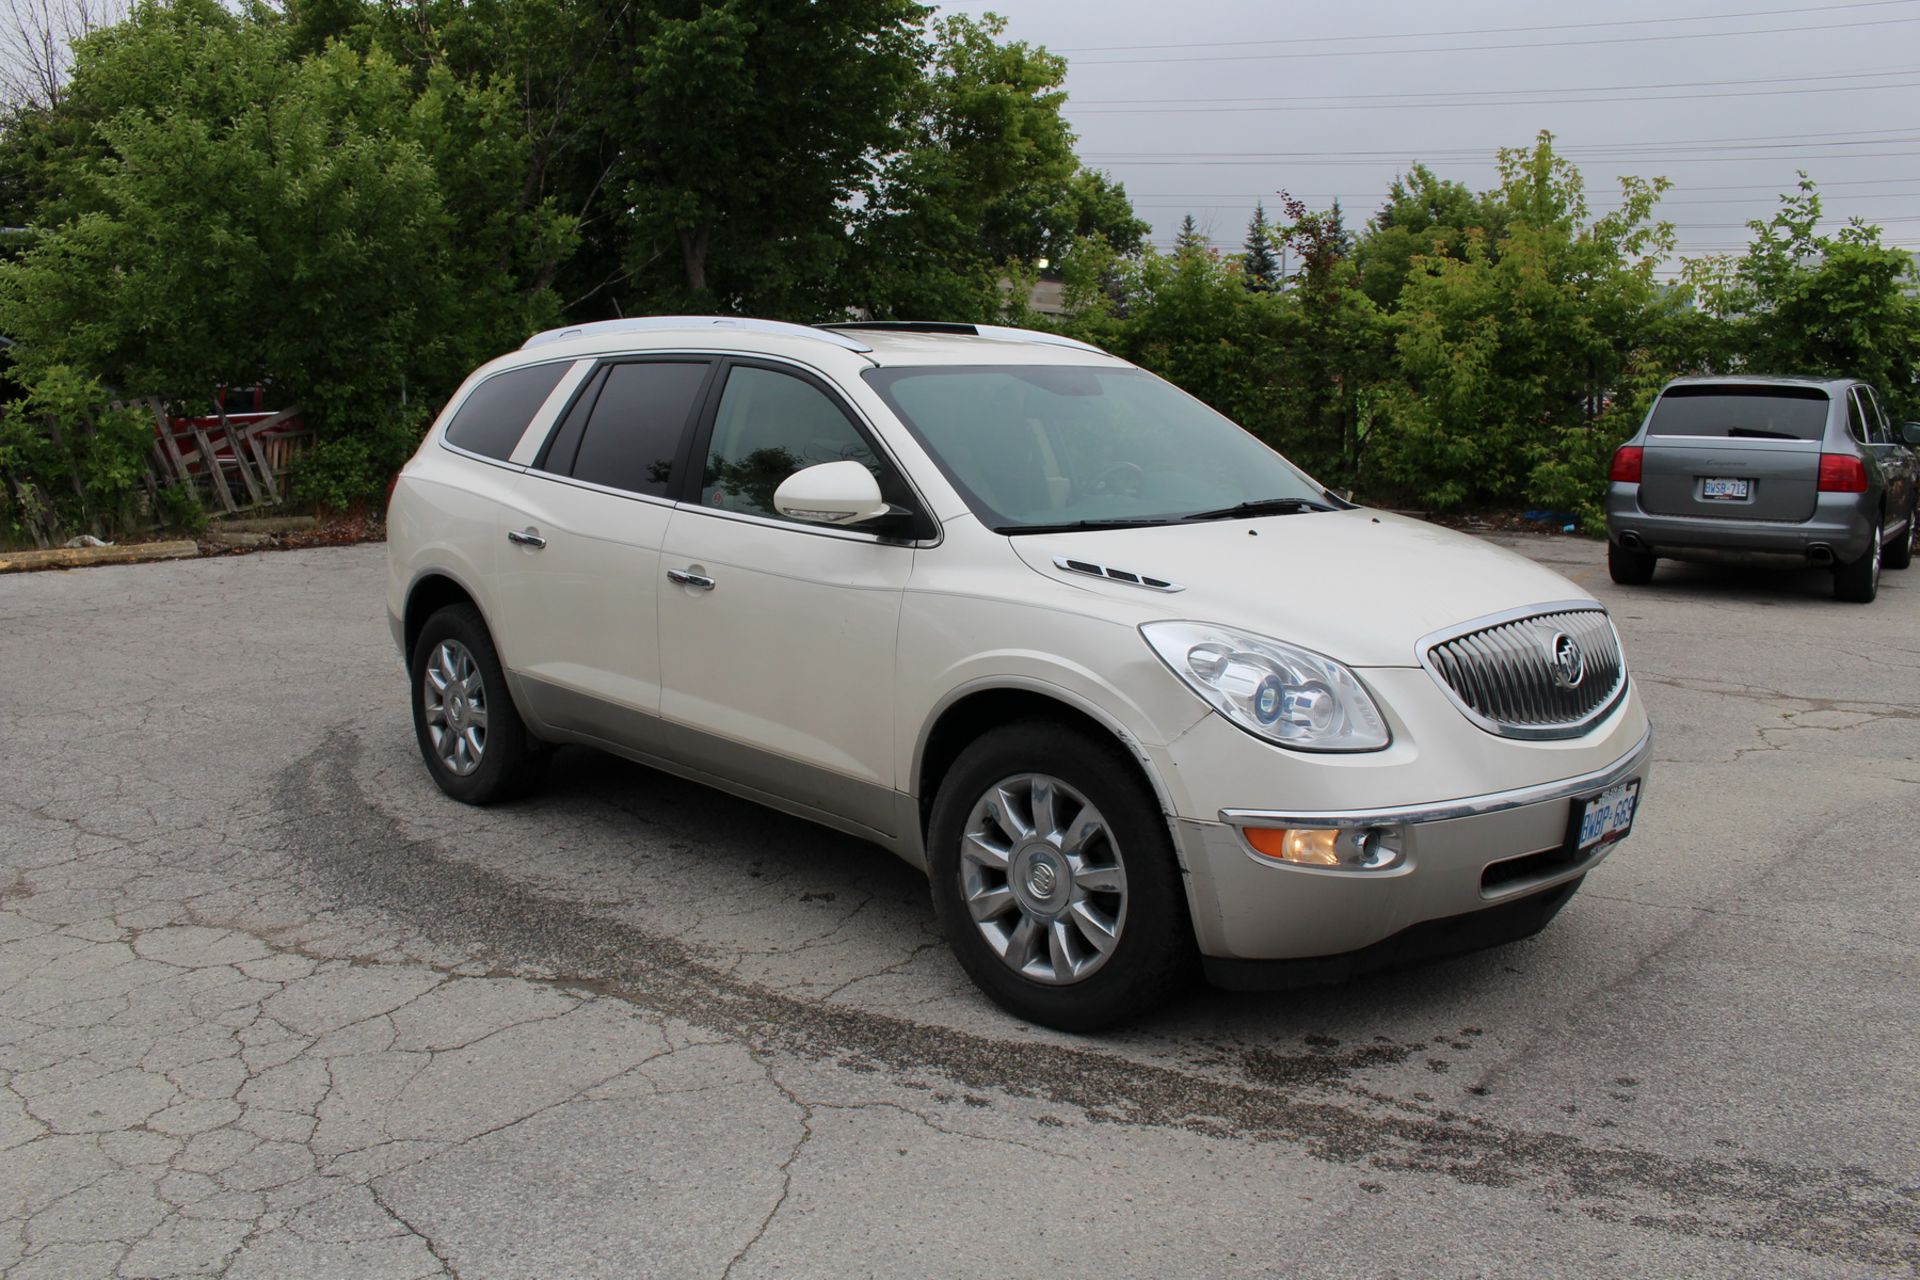 2011 BUICK MODEL ENCLAVE SUV W/ 3.6L V6 GAS ENGINE (APPROX. 218,000 KM), VIN 5GAKRCED2BJ397396 ( - Image 4 of 4